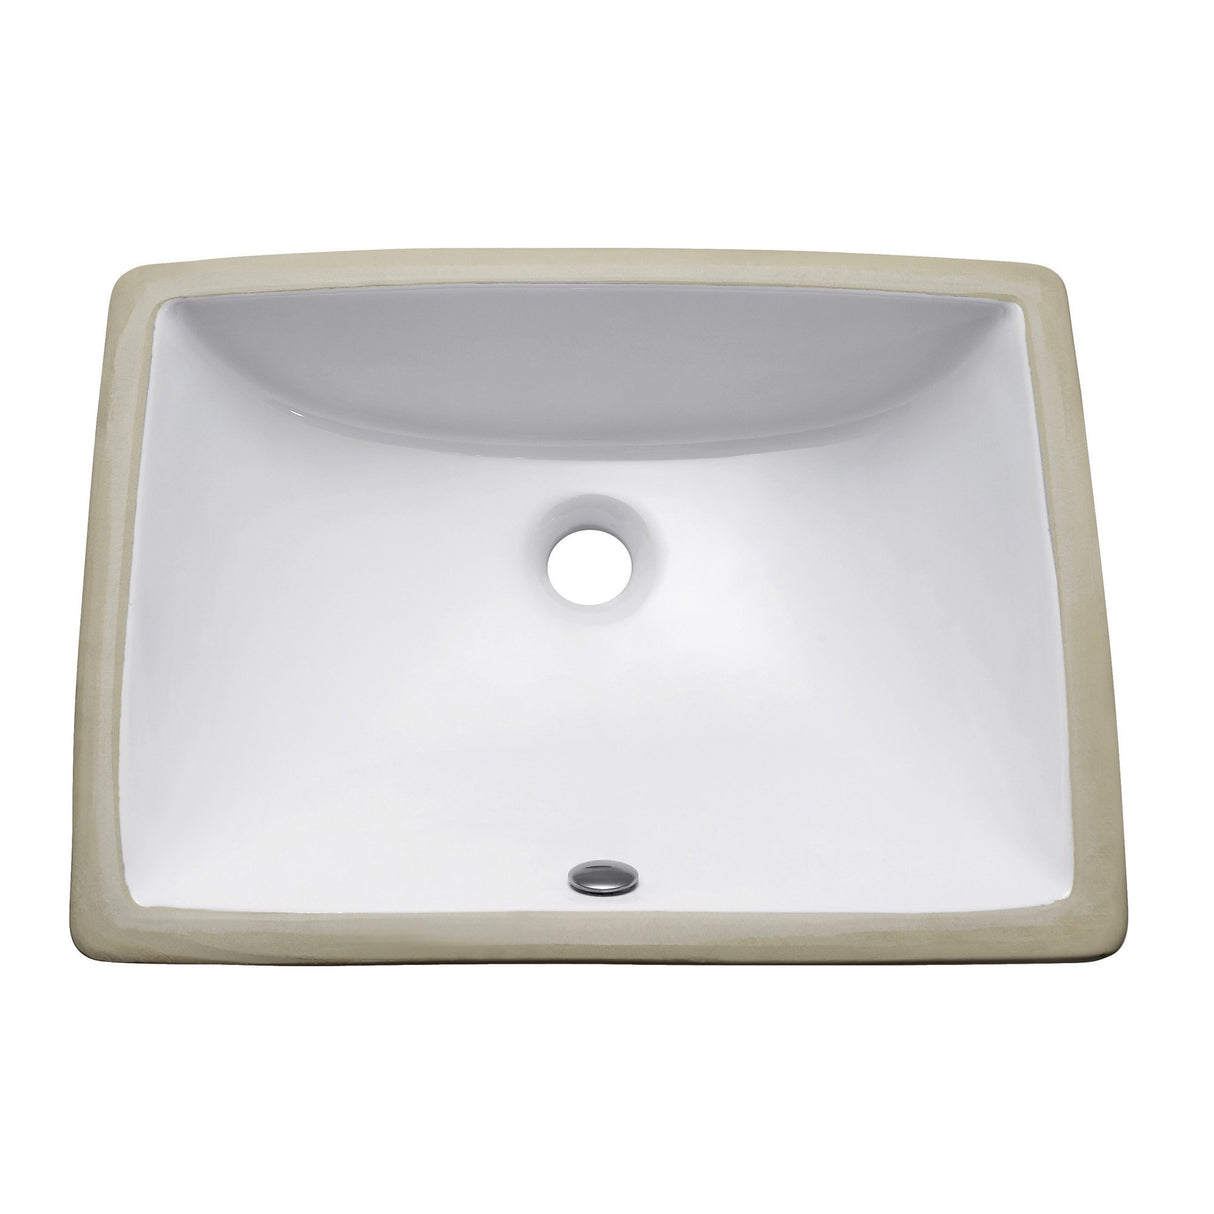 20 in. Undermount Rectangular Vitreous China Sink in White